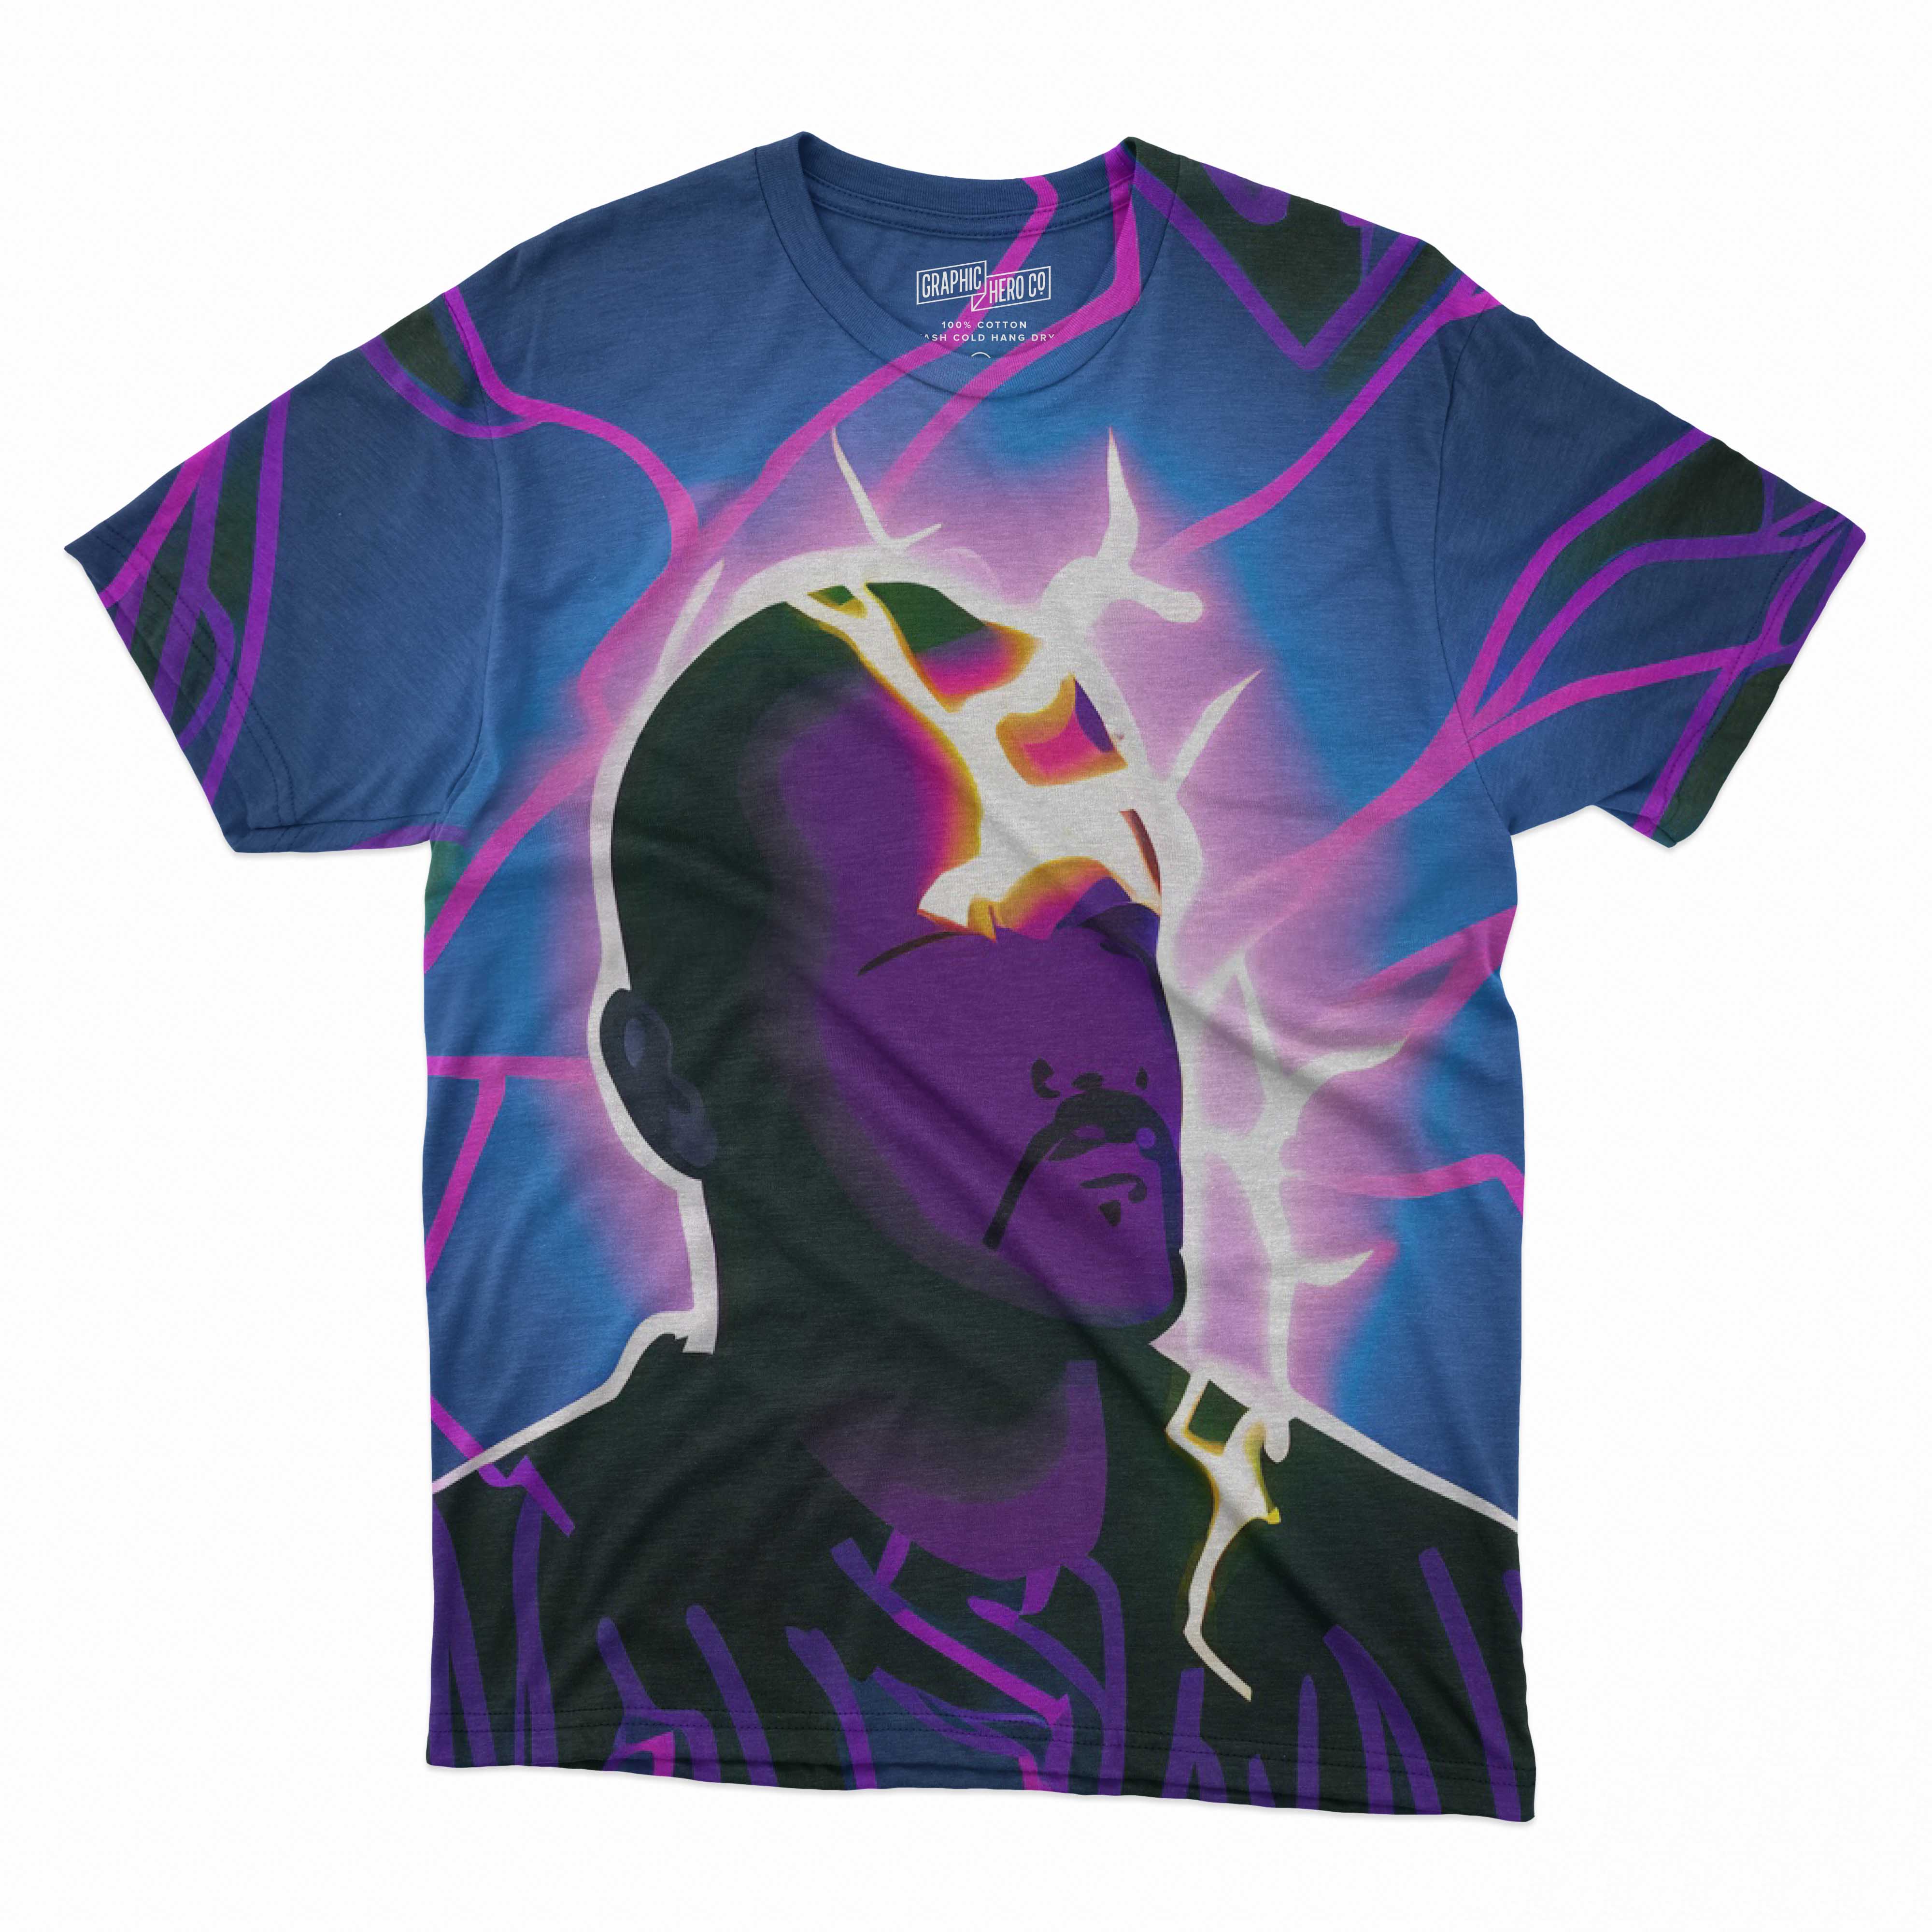 "Artistic Expressions: Unleash Your Style with Unique and Vibrant T-Shirt Designs!" preview image.